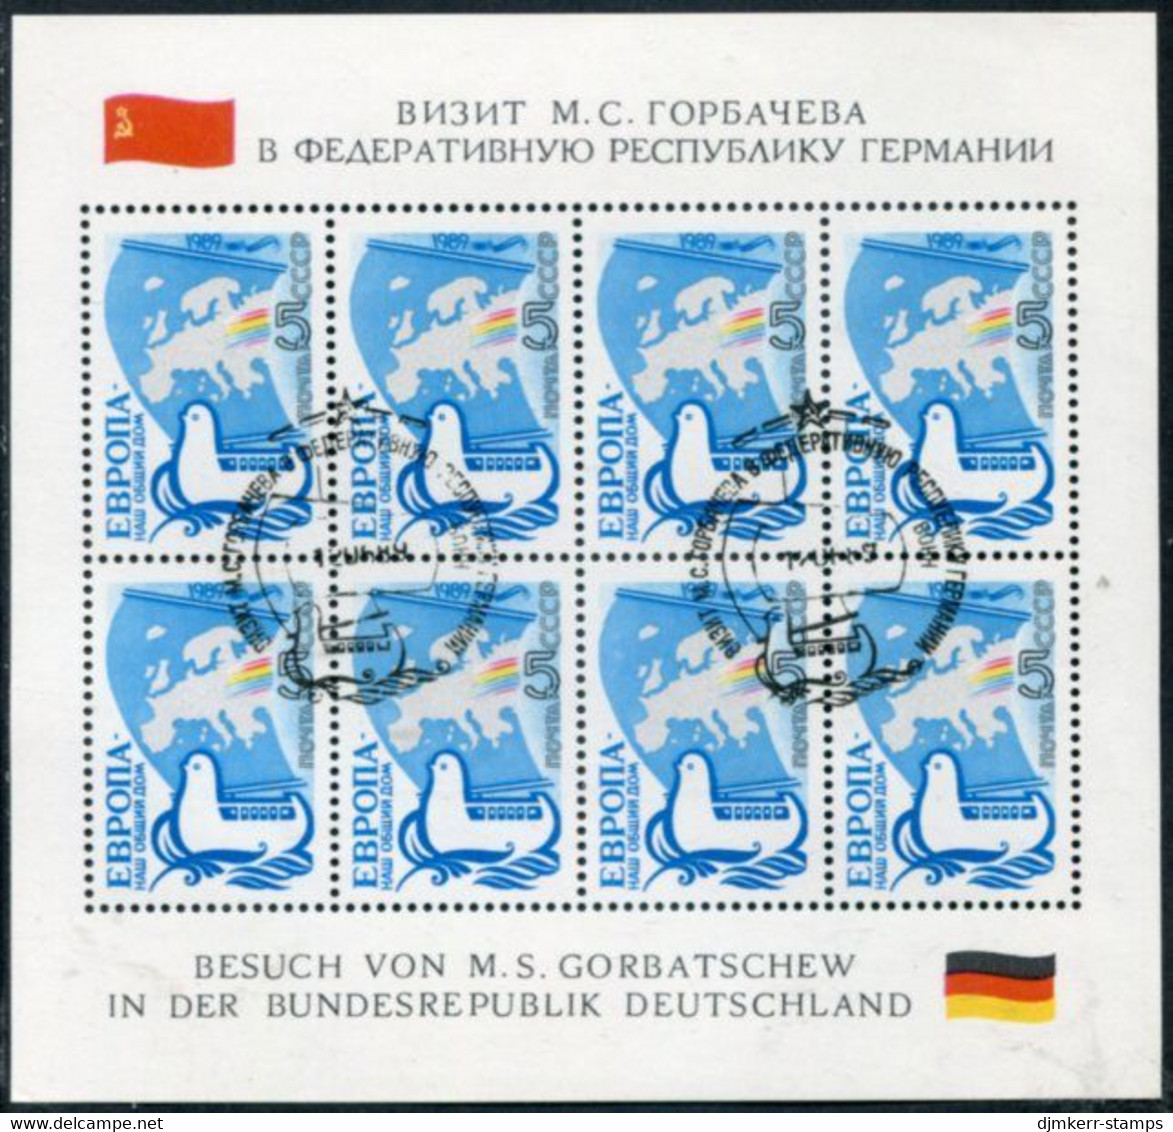 SOVIET UNION 1989 Europa: Our Common Home Sheetlet Used.  Michel 5955 Kb - Blocs & Feuillets